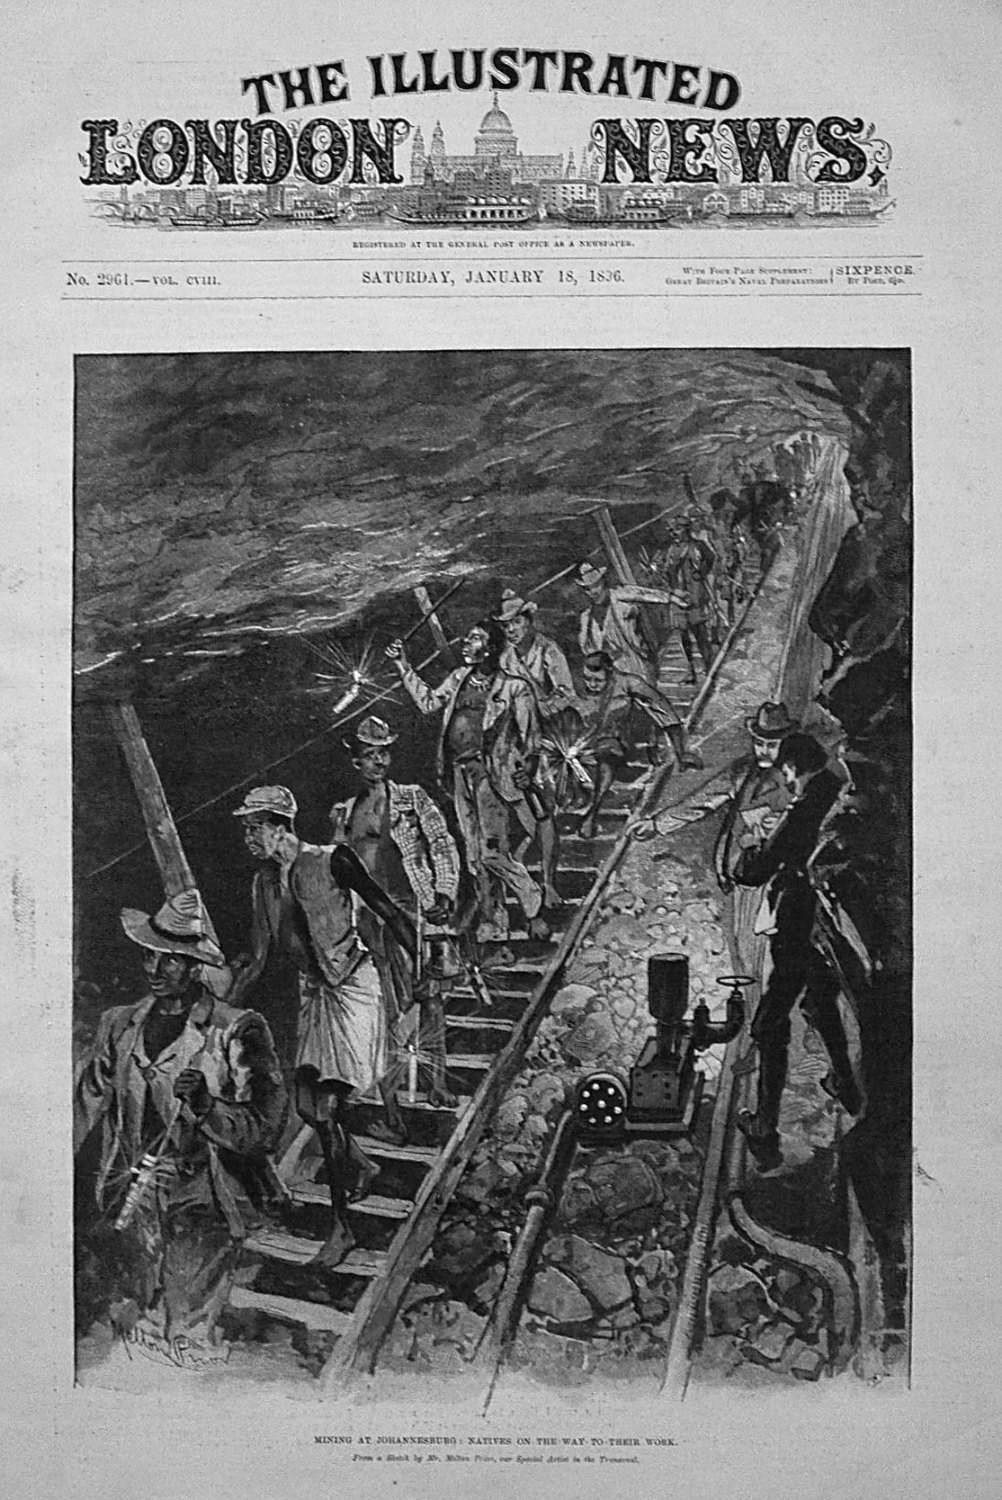 Mining at Johannesburg : Natives on the way to their Work. 1896